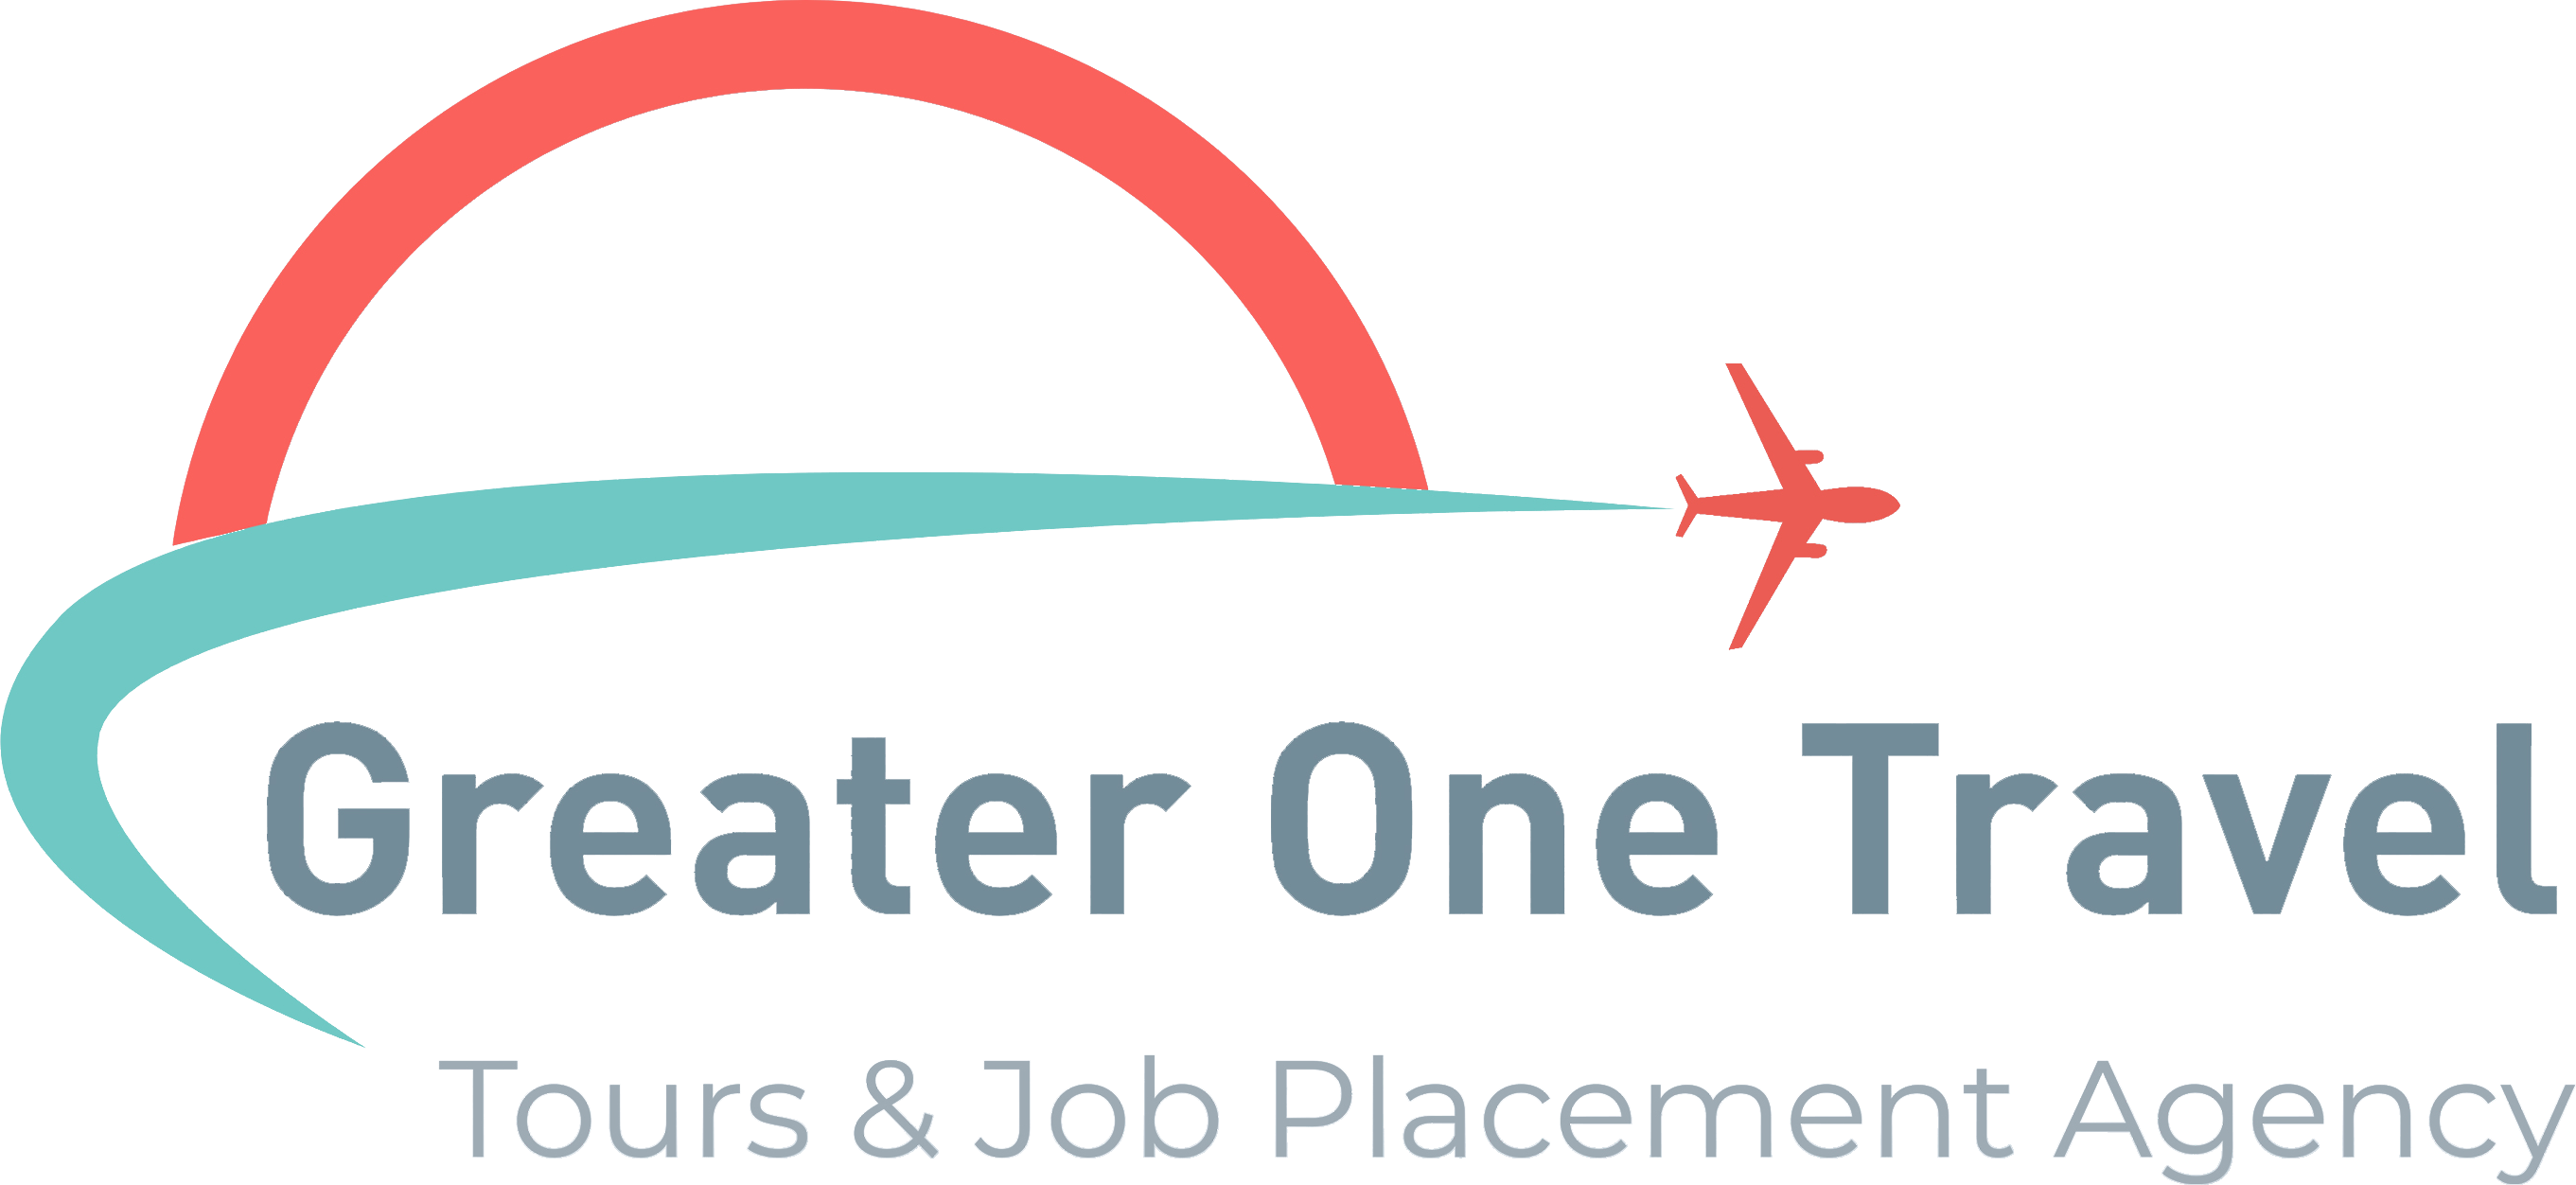 Job Placements Greater One Travel, Tours and Job Placement Agency